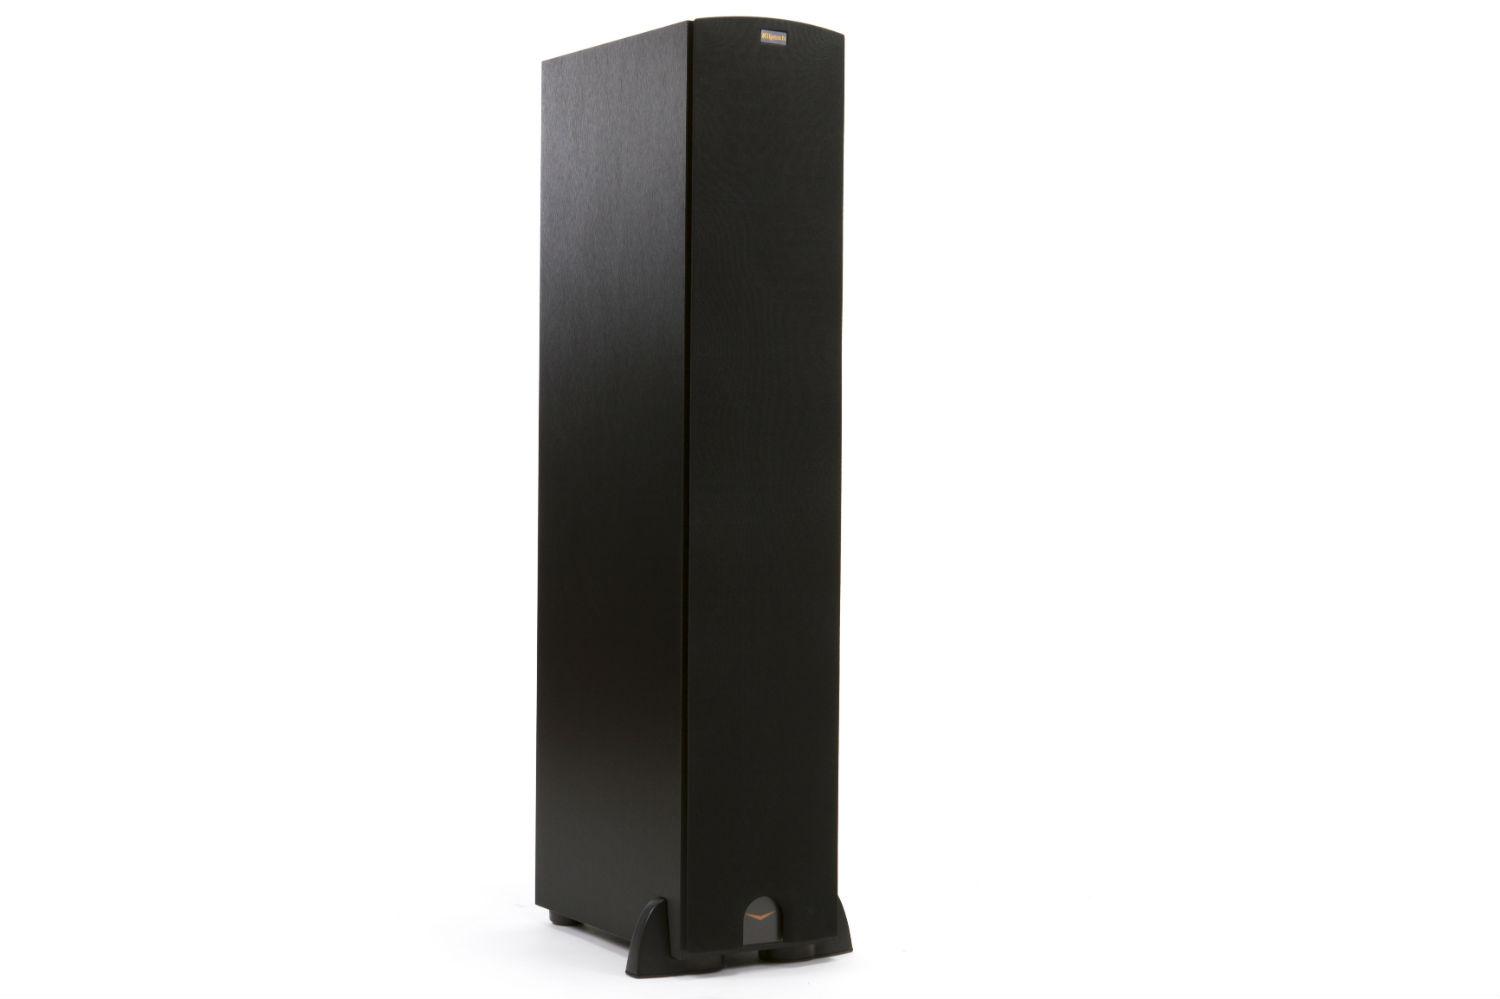 klipsch unveils stockpile new speakers reference home theater line r 26f grille